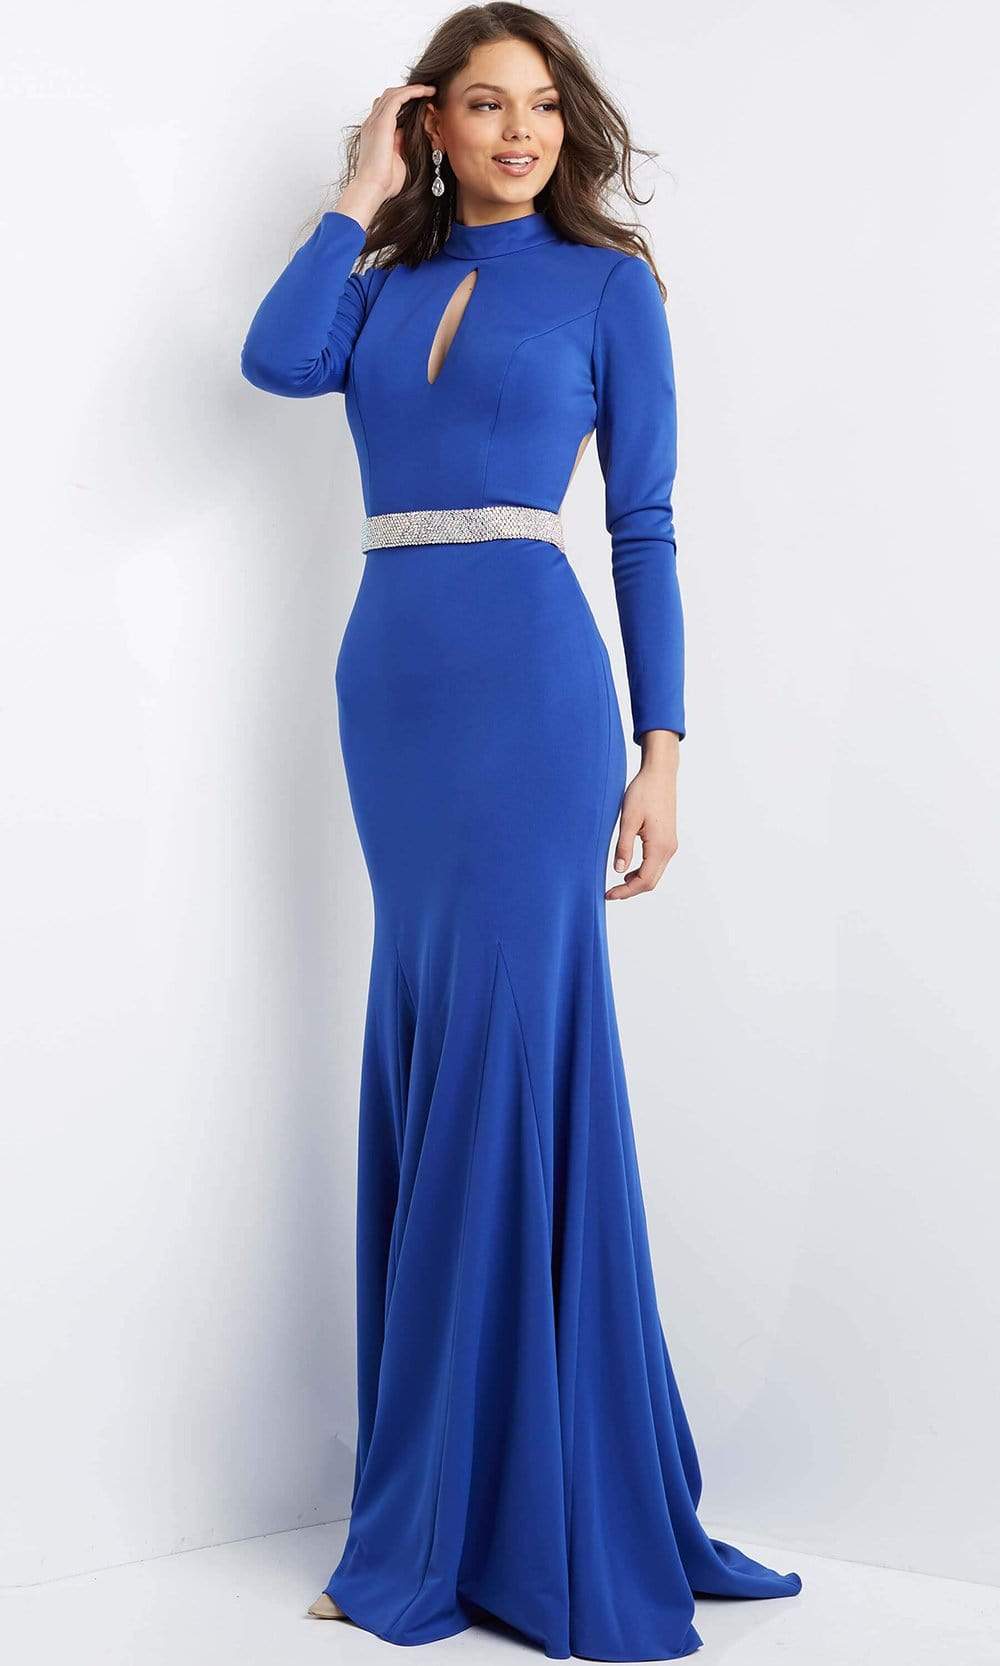 Jovani - 07392 High Neck Cutout Bodice Gown Special Occasion Dress 00 / Royal